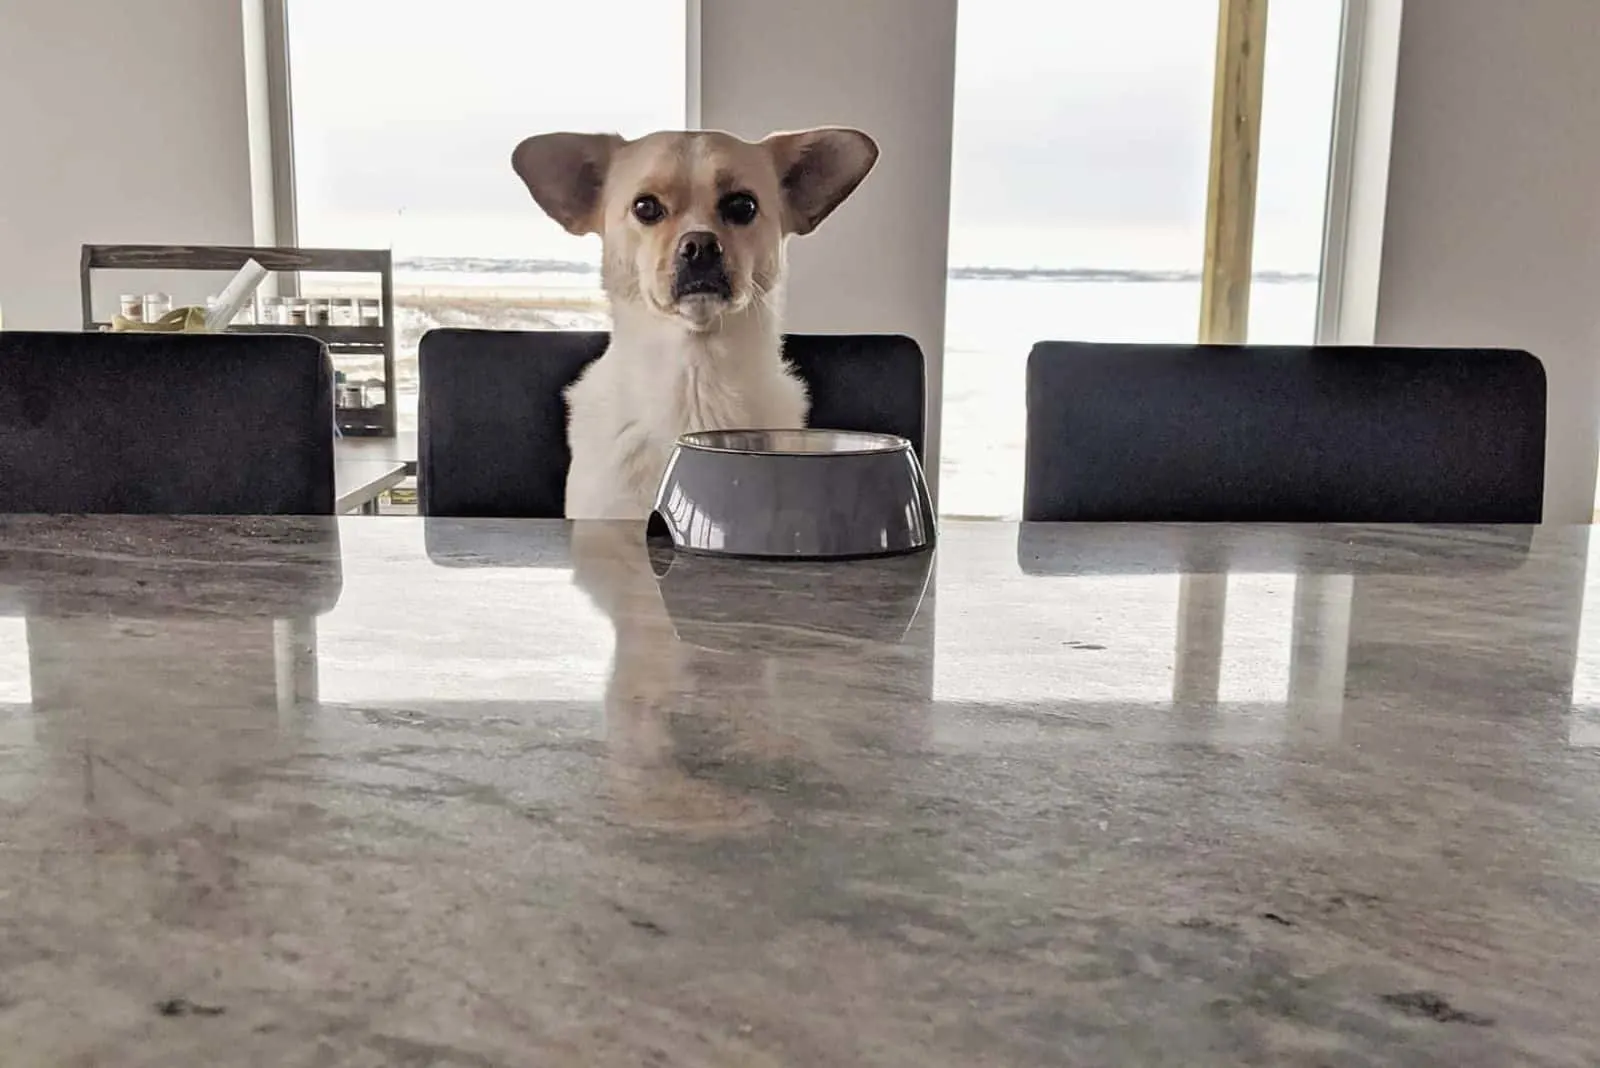 corgi mix boxer in front of the food bowl in the table